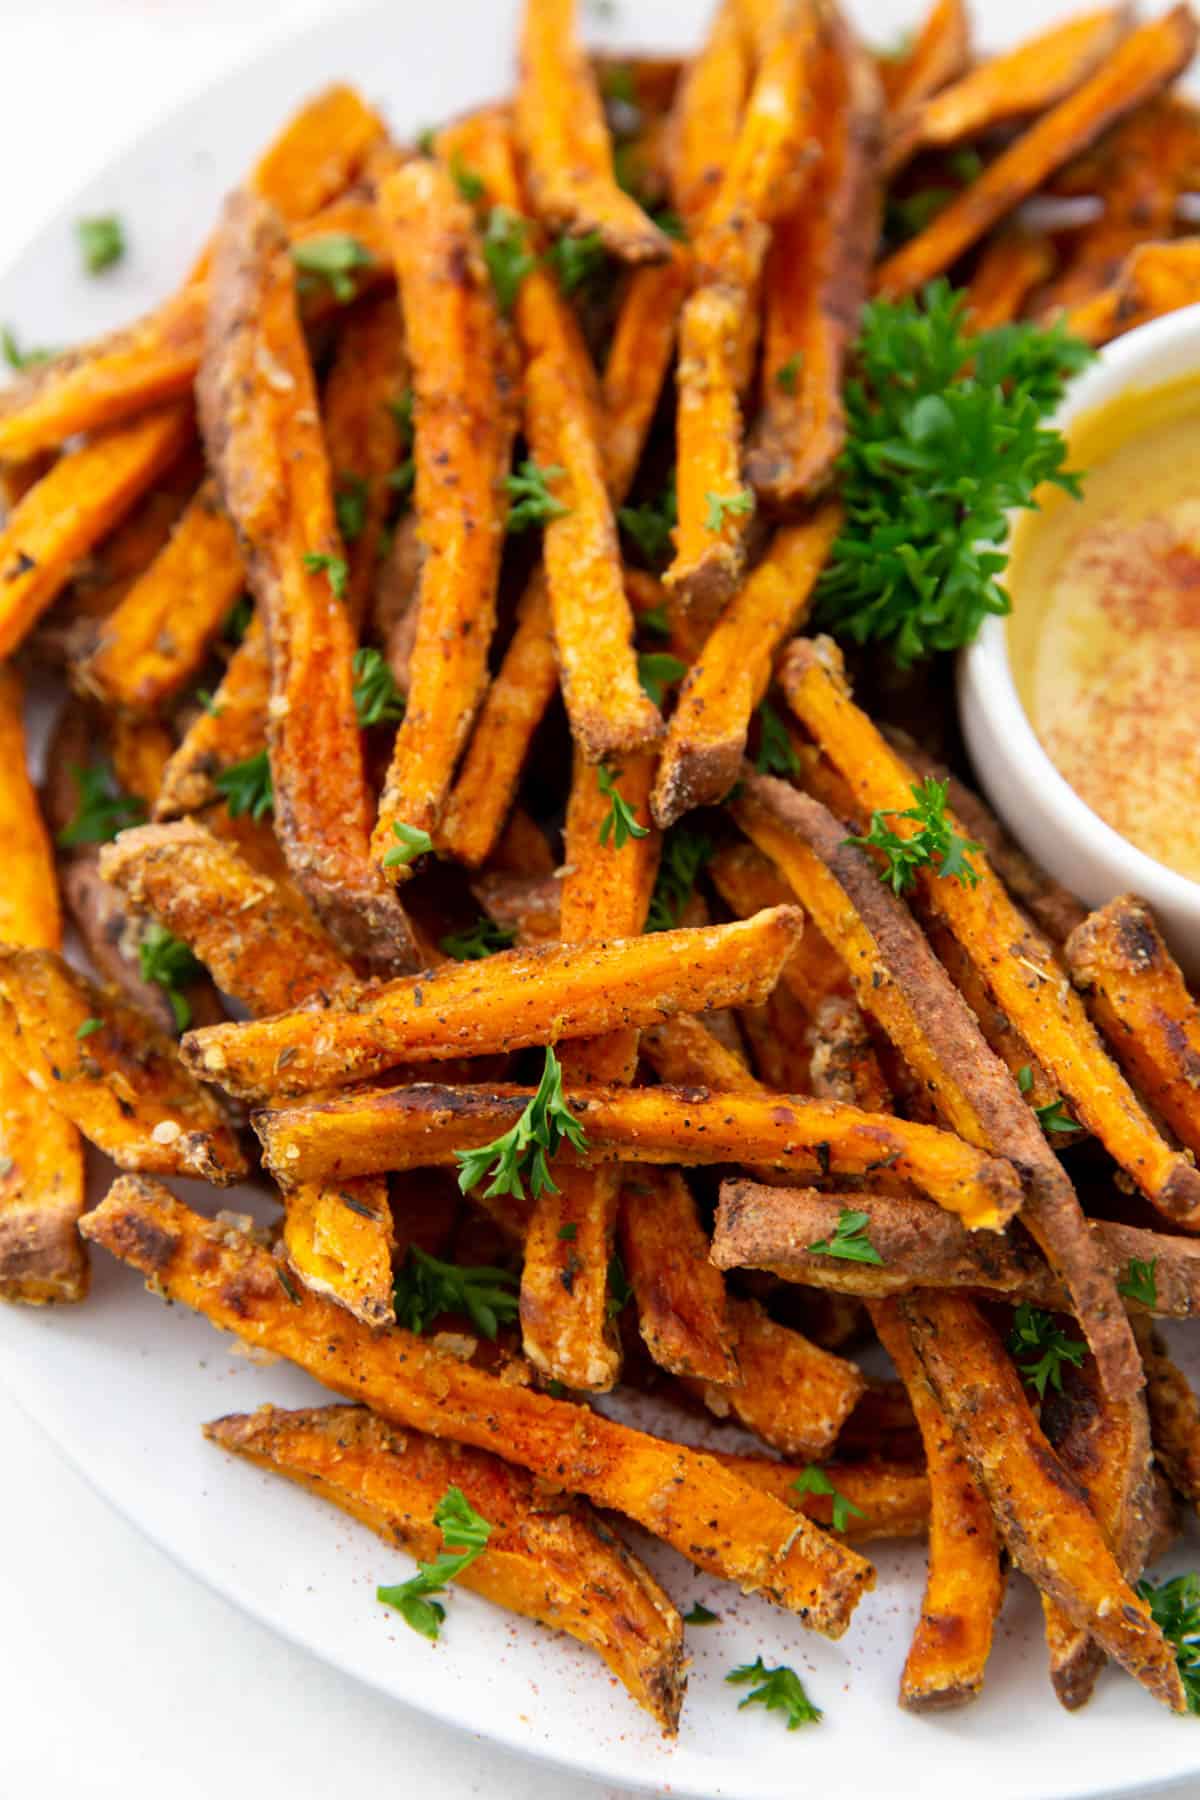 baked sweet potato fries on a plate